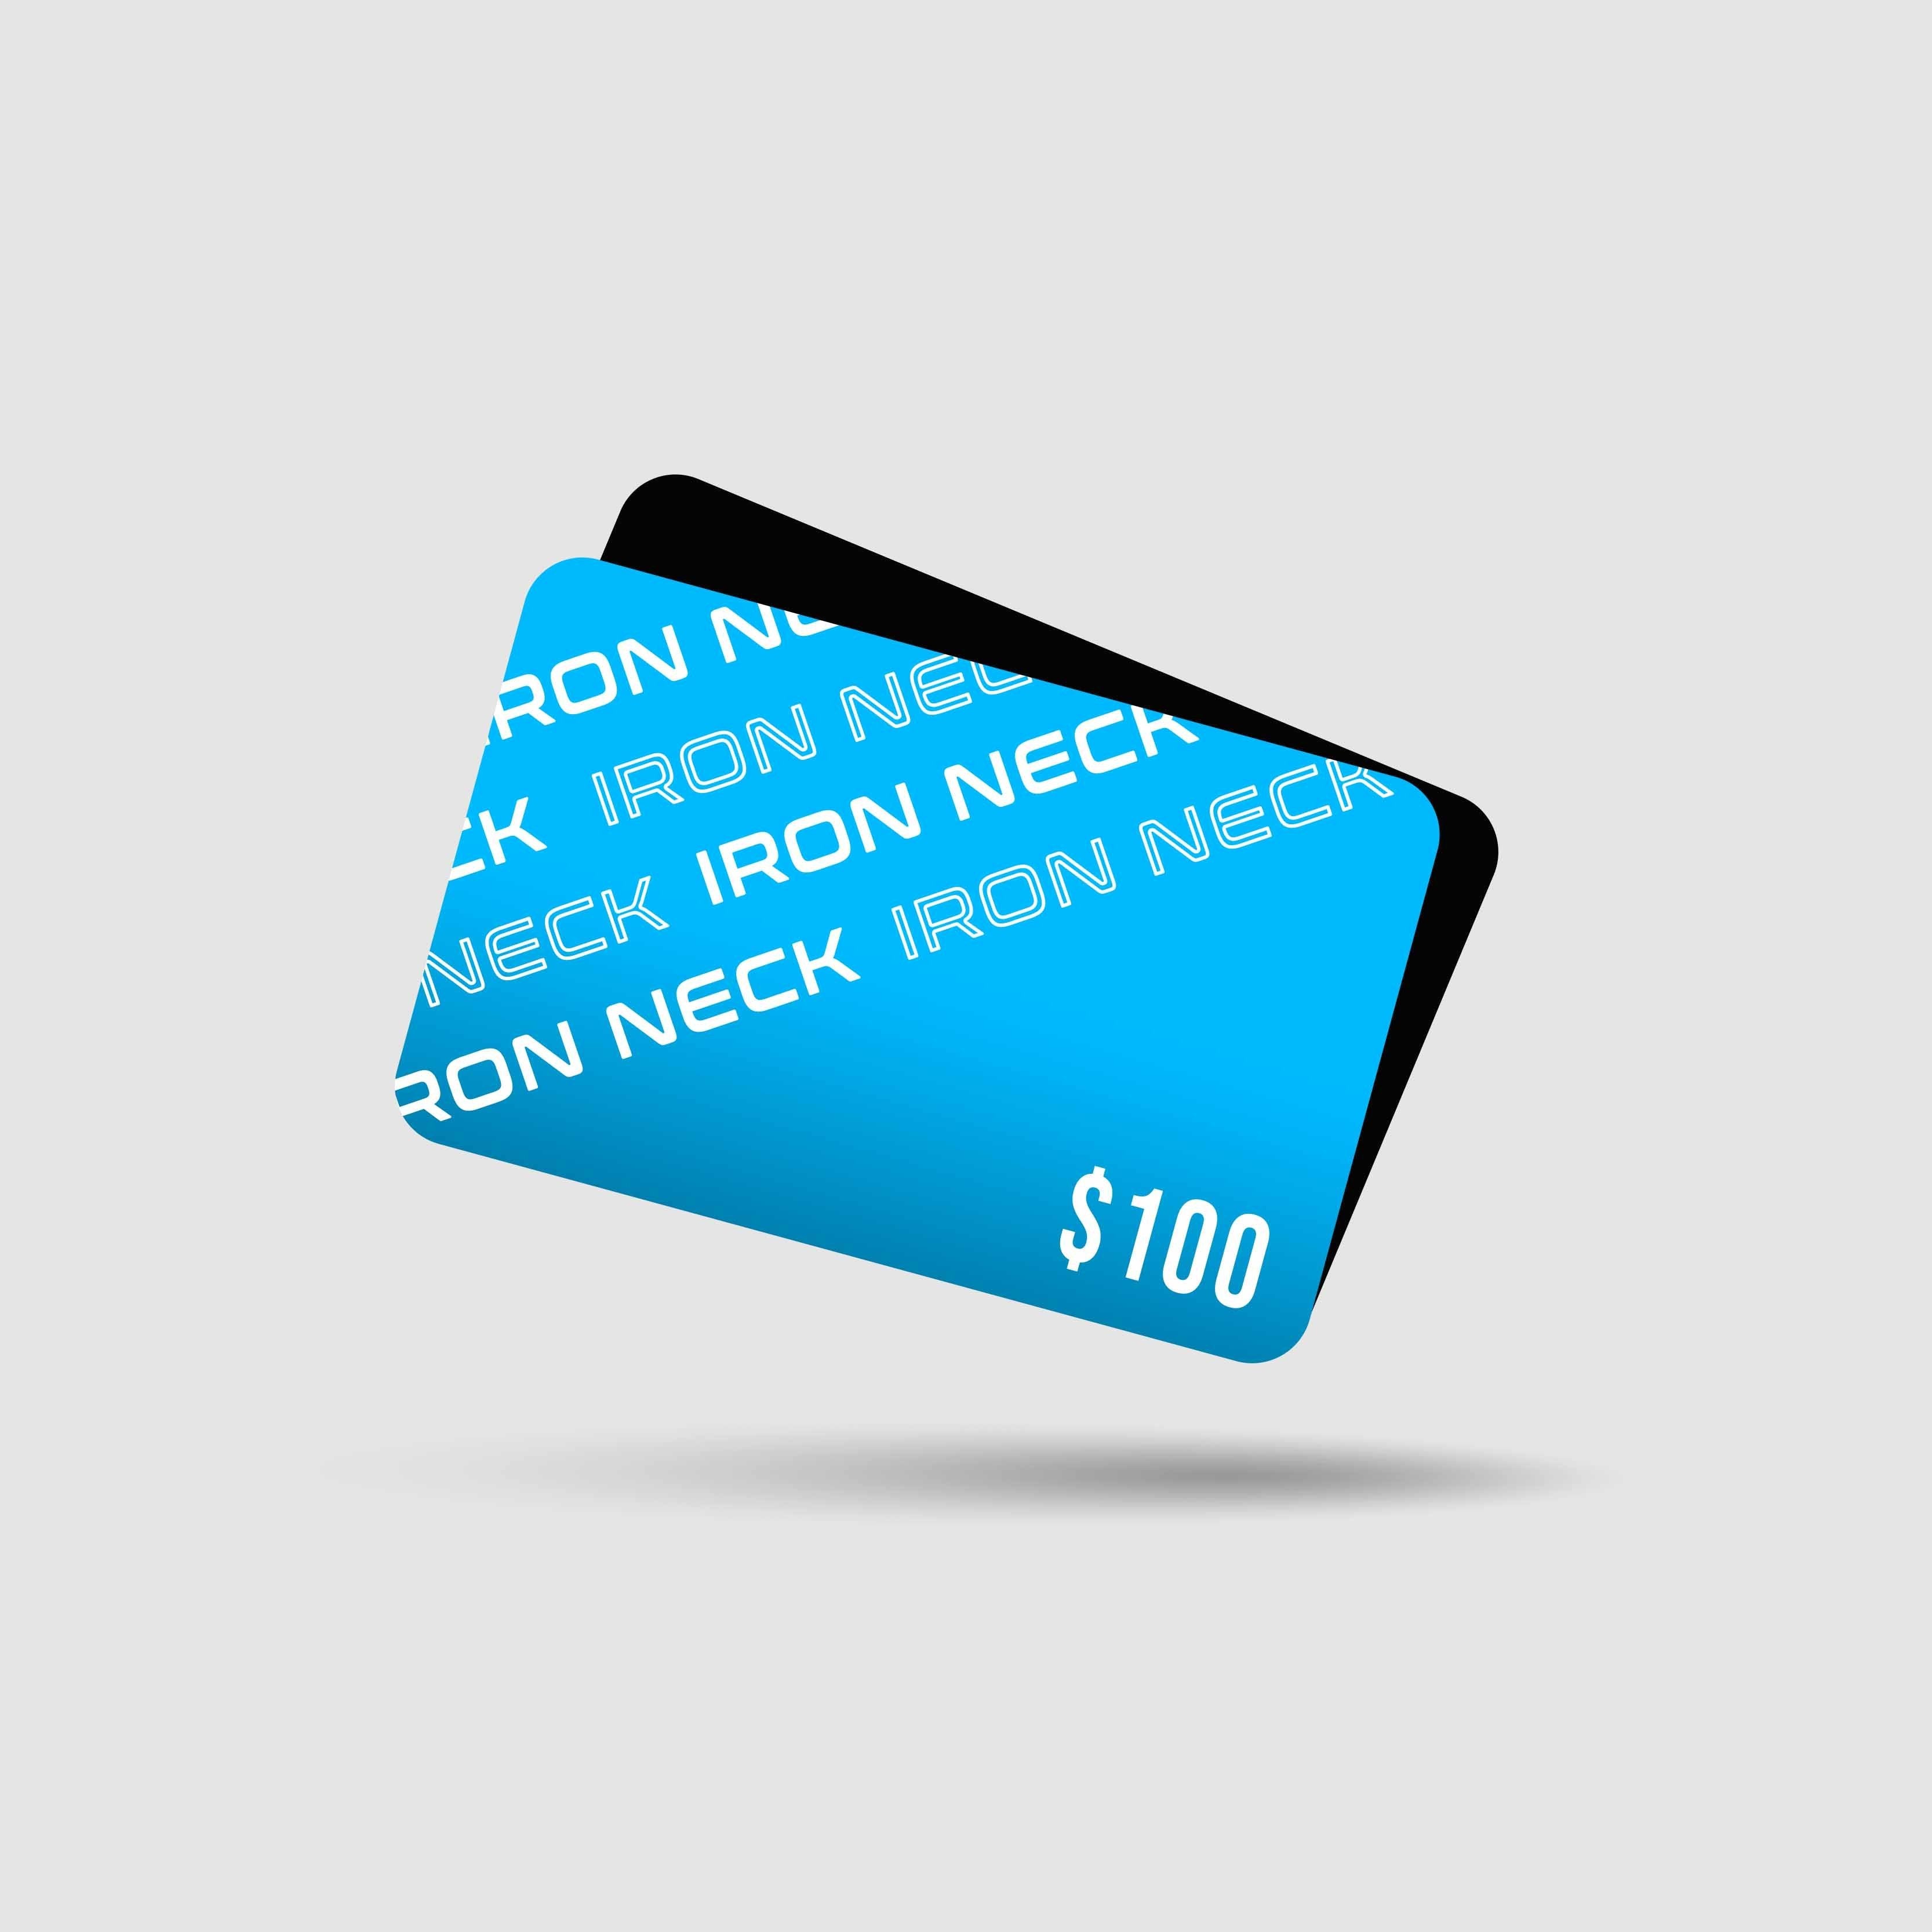 Gift Card Gift Card Iron Neck $100  